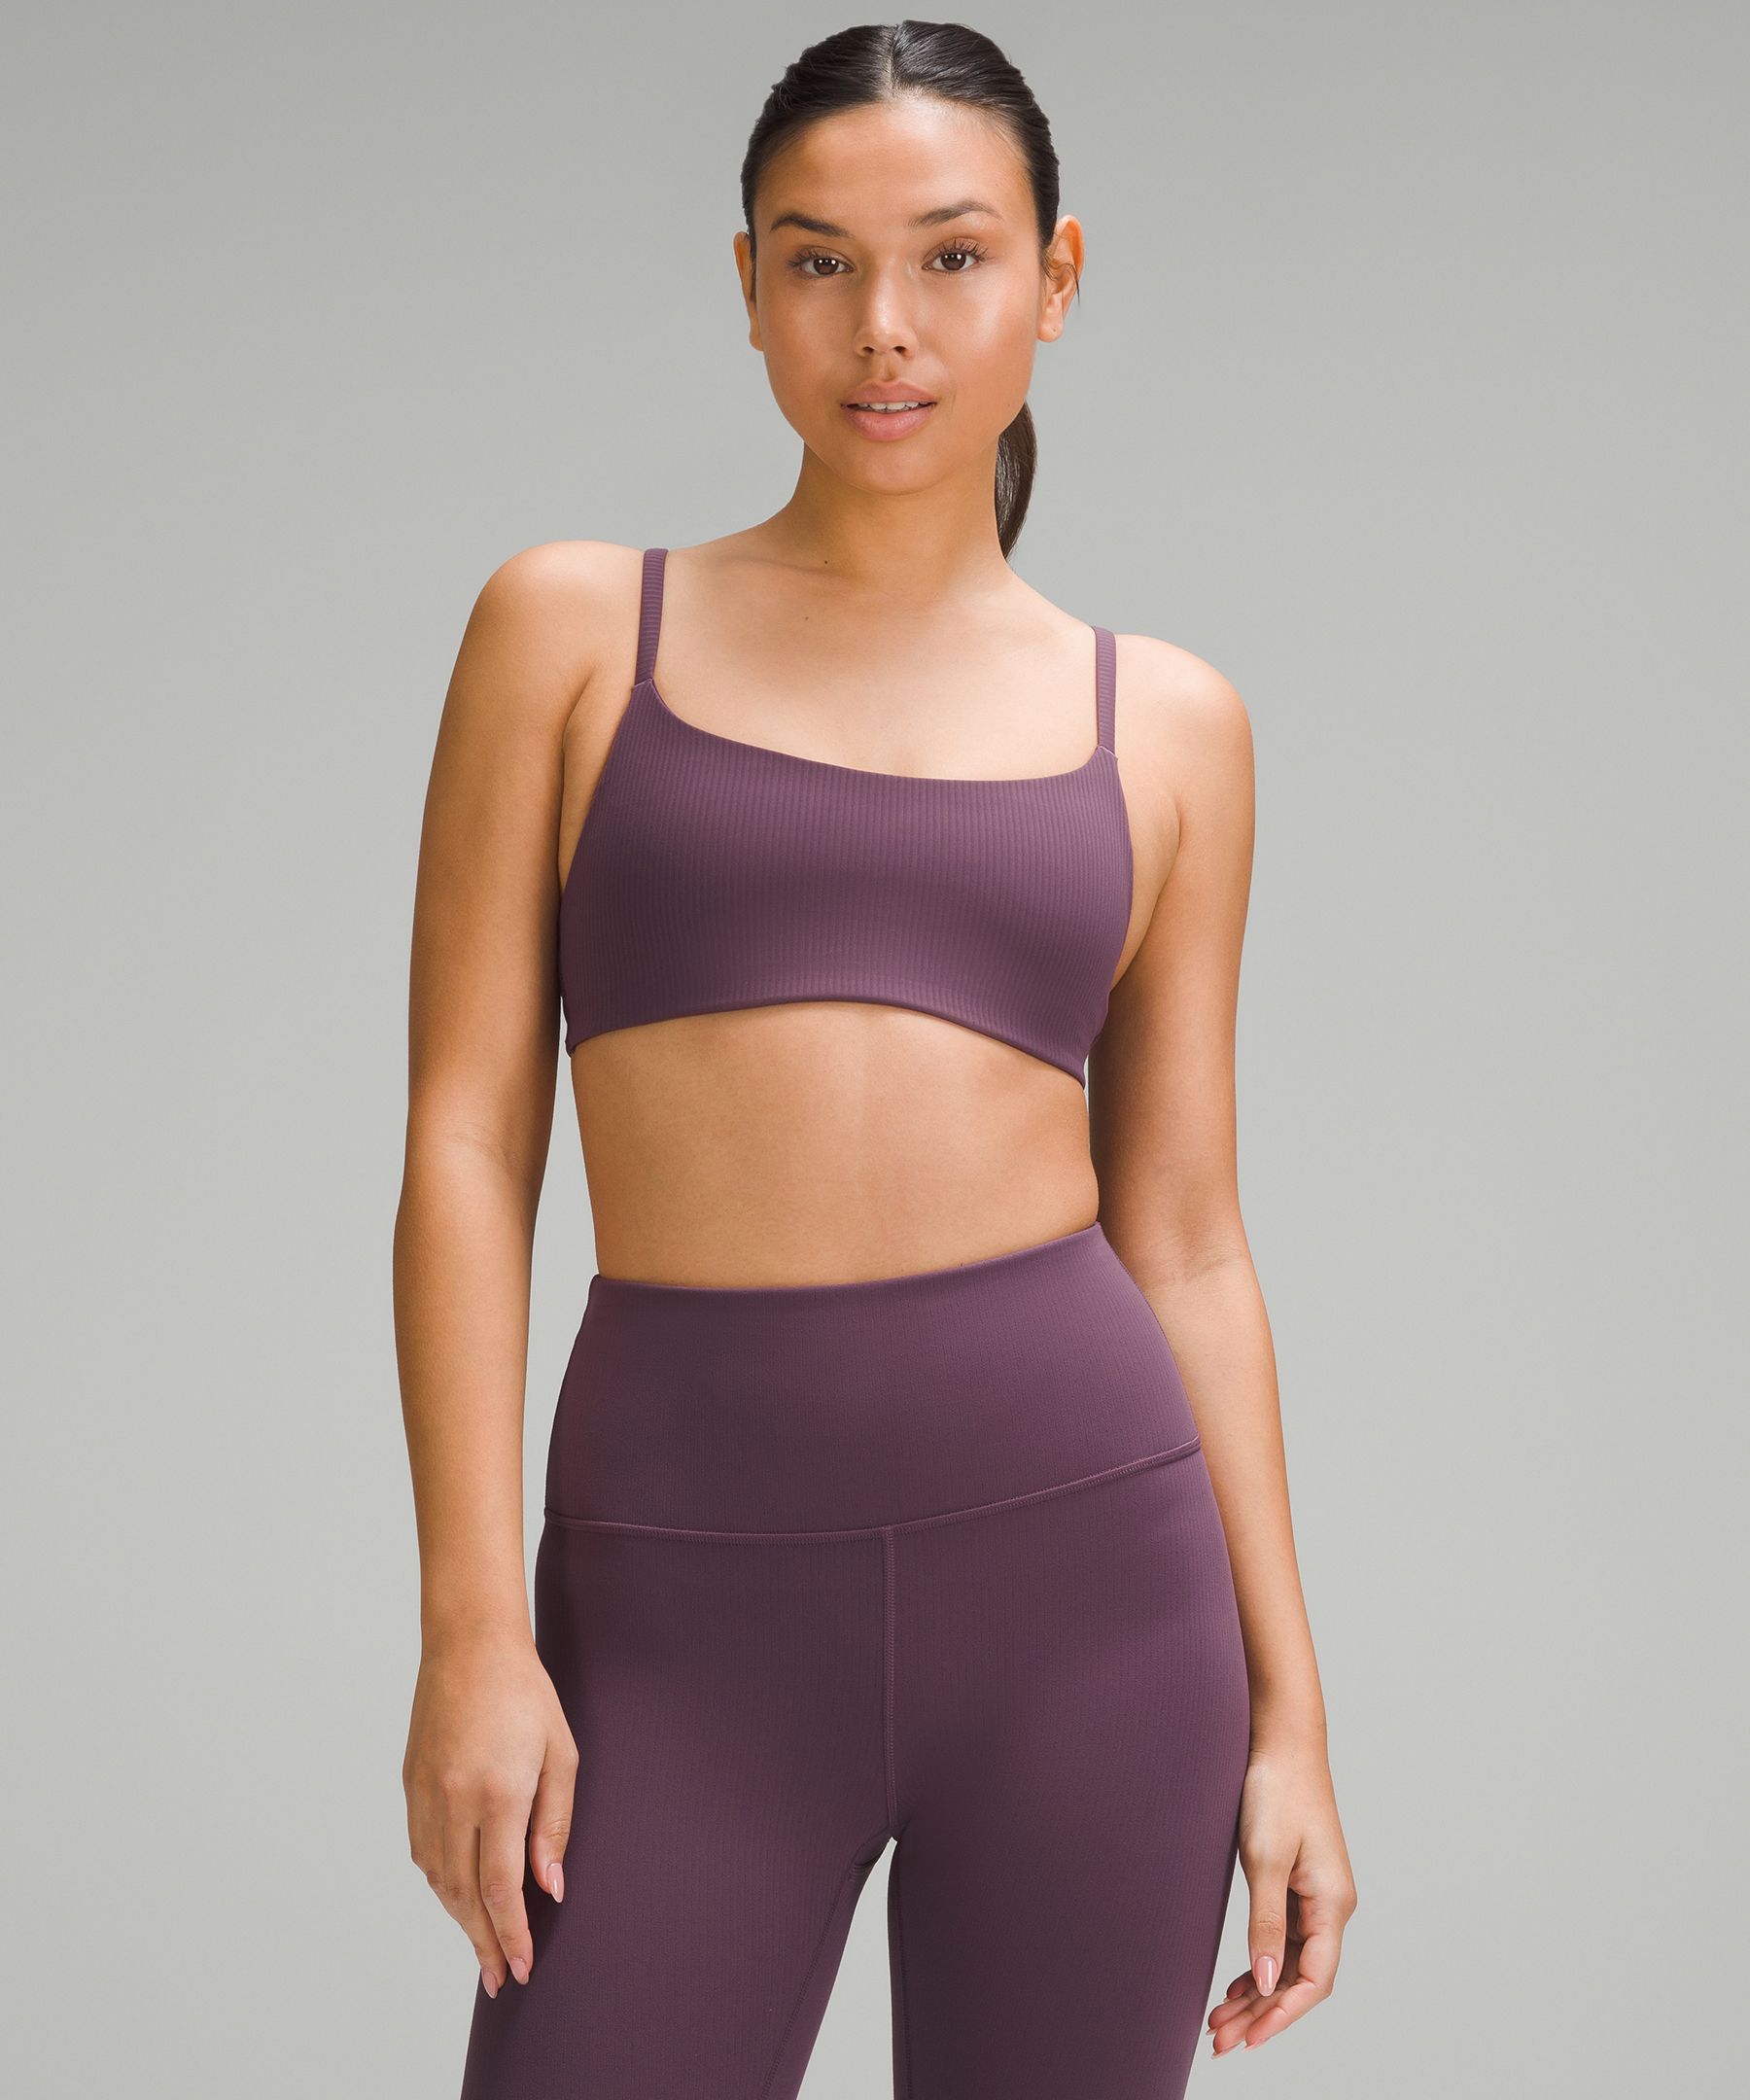 Lululemon Wunder Train Strappy Racer Bra Ribbed Light Support, A/b Cup In Purple